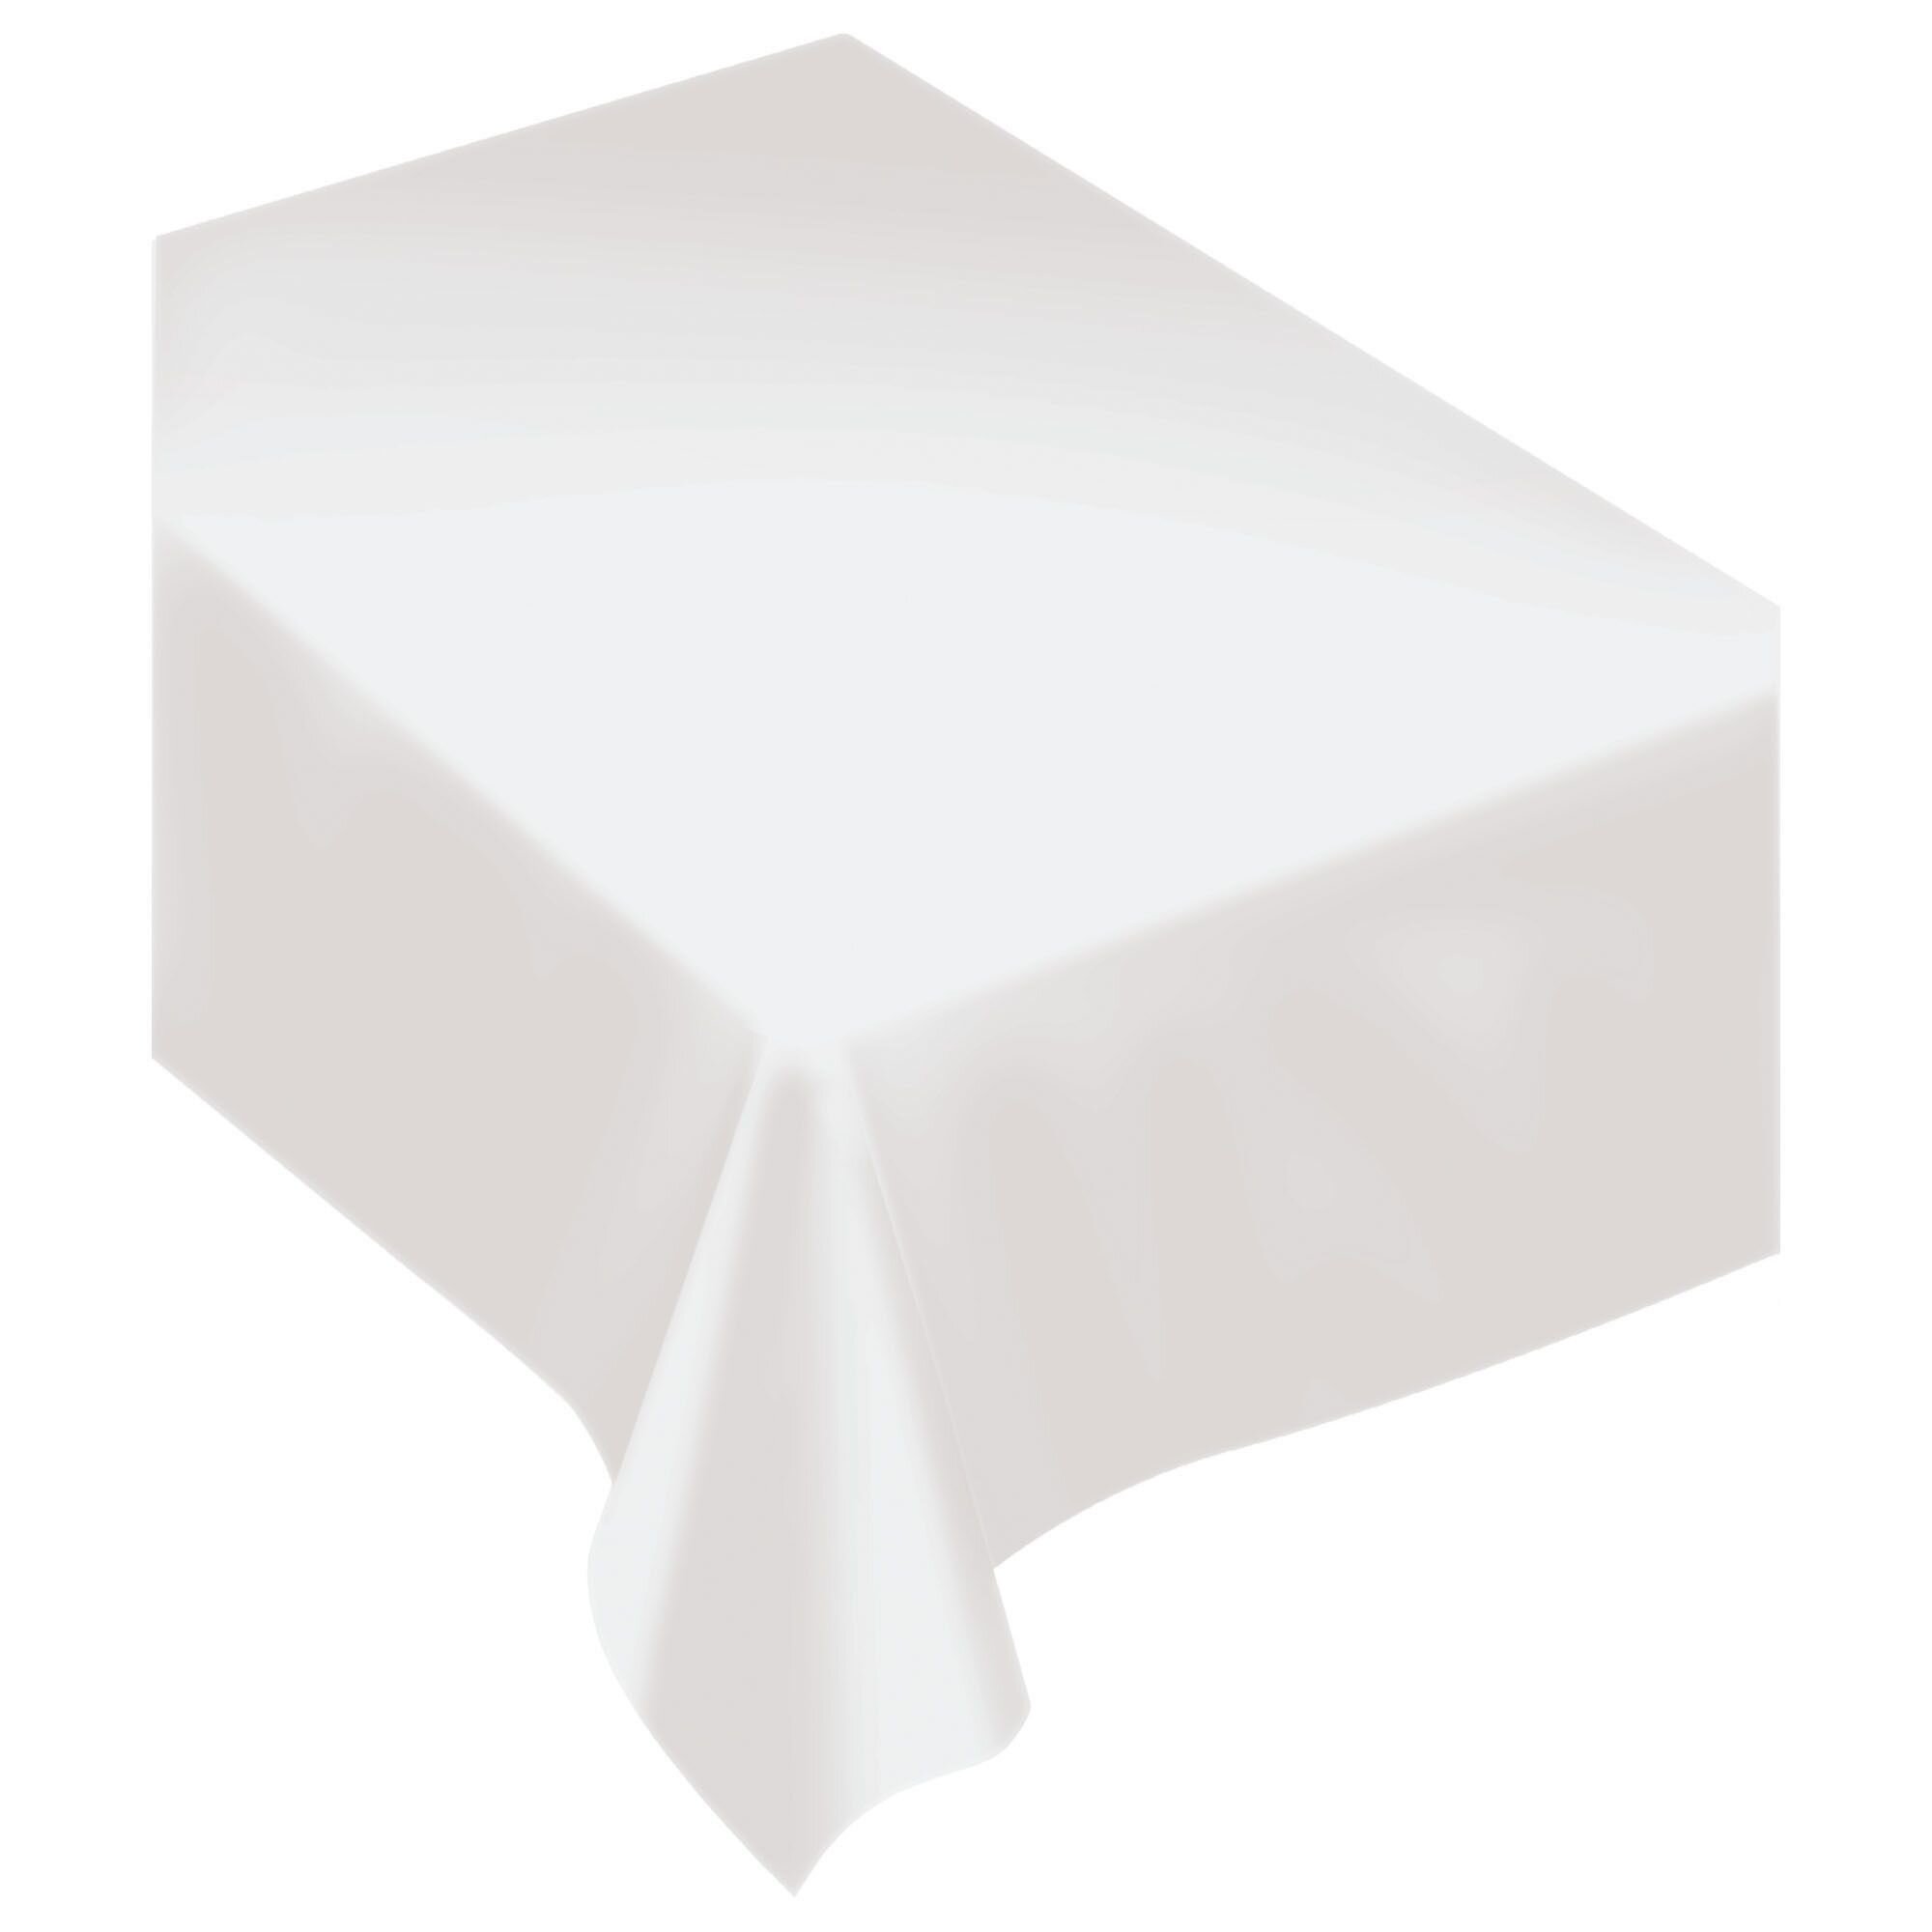 White Wedding Rectangle Tablecloth Tablecloth 56 x 80 Inch-White Rectangular Table Cloth Washable Polyester Great for Buffet Table Holiday Dinner Parties